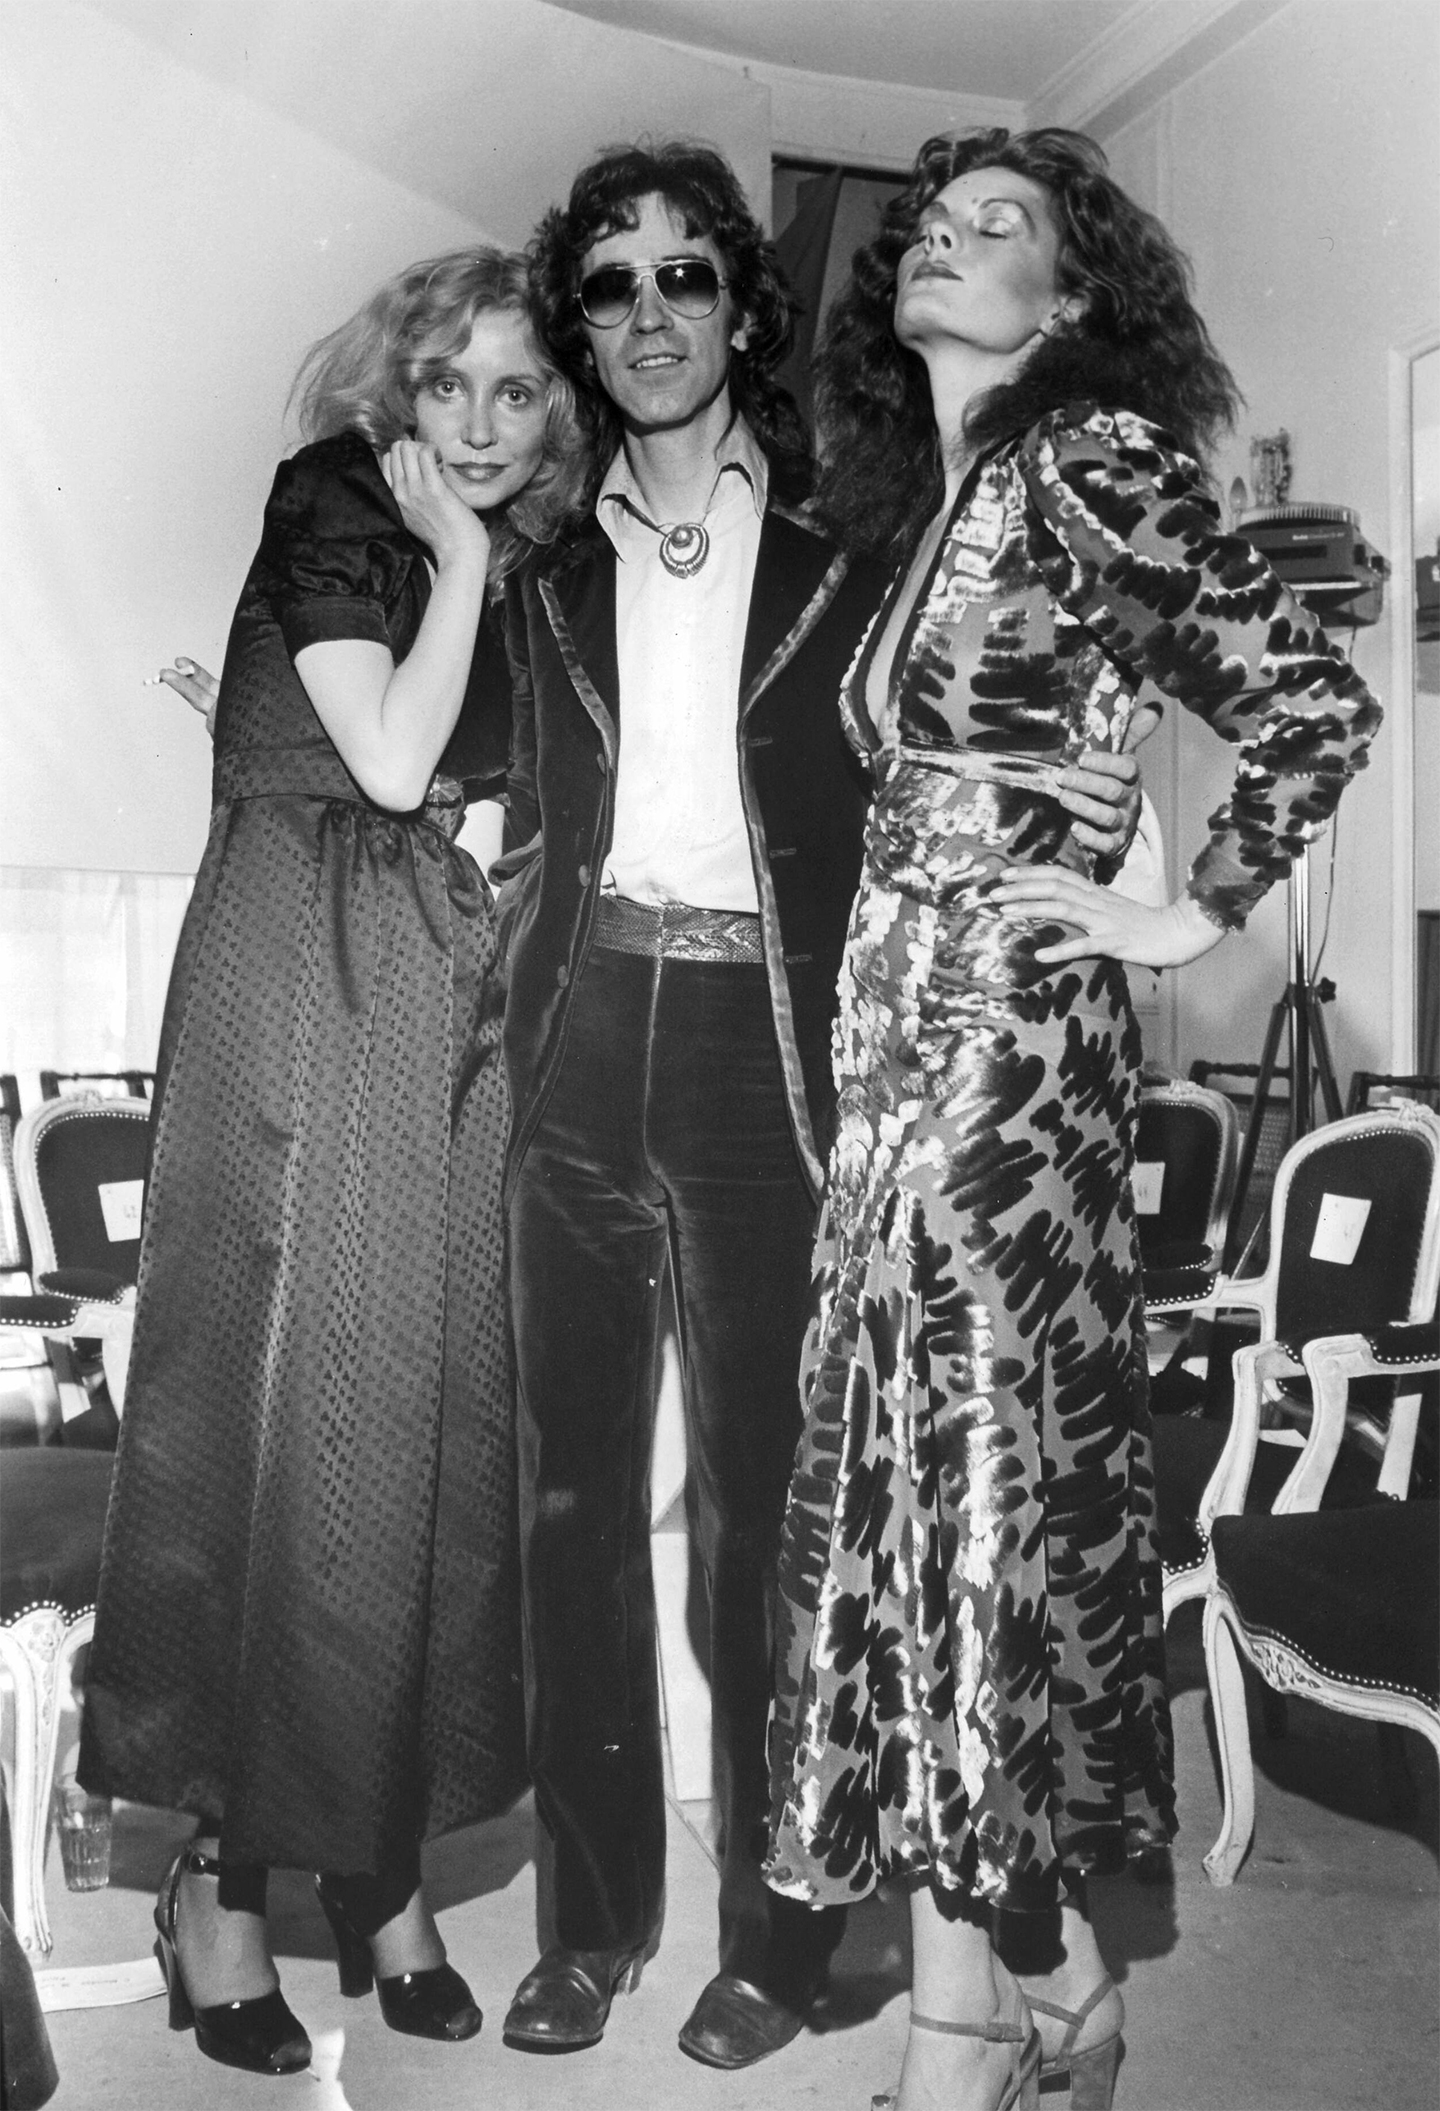 From the left: Ossie, Gala Mitchell and another model in New York, ca. 1974